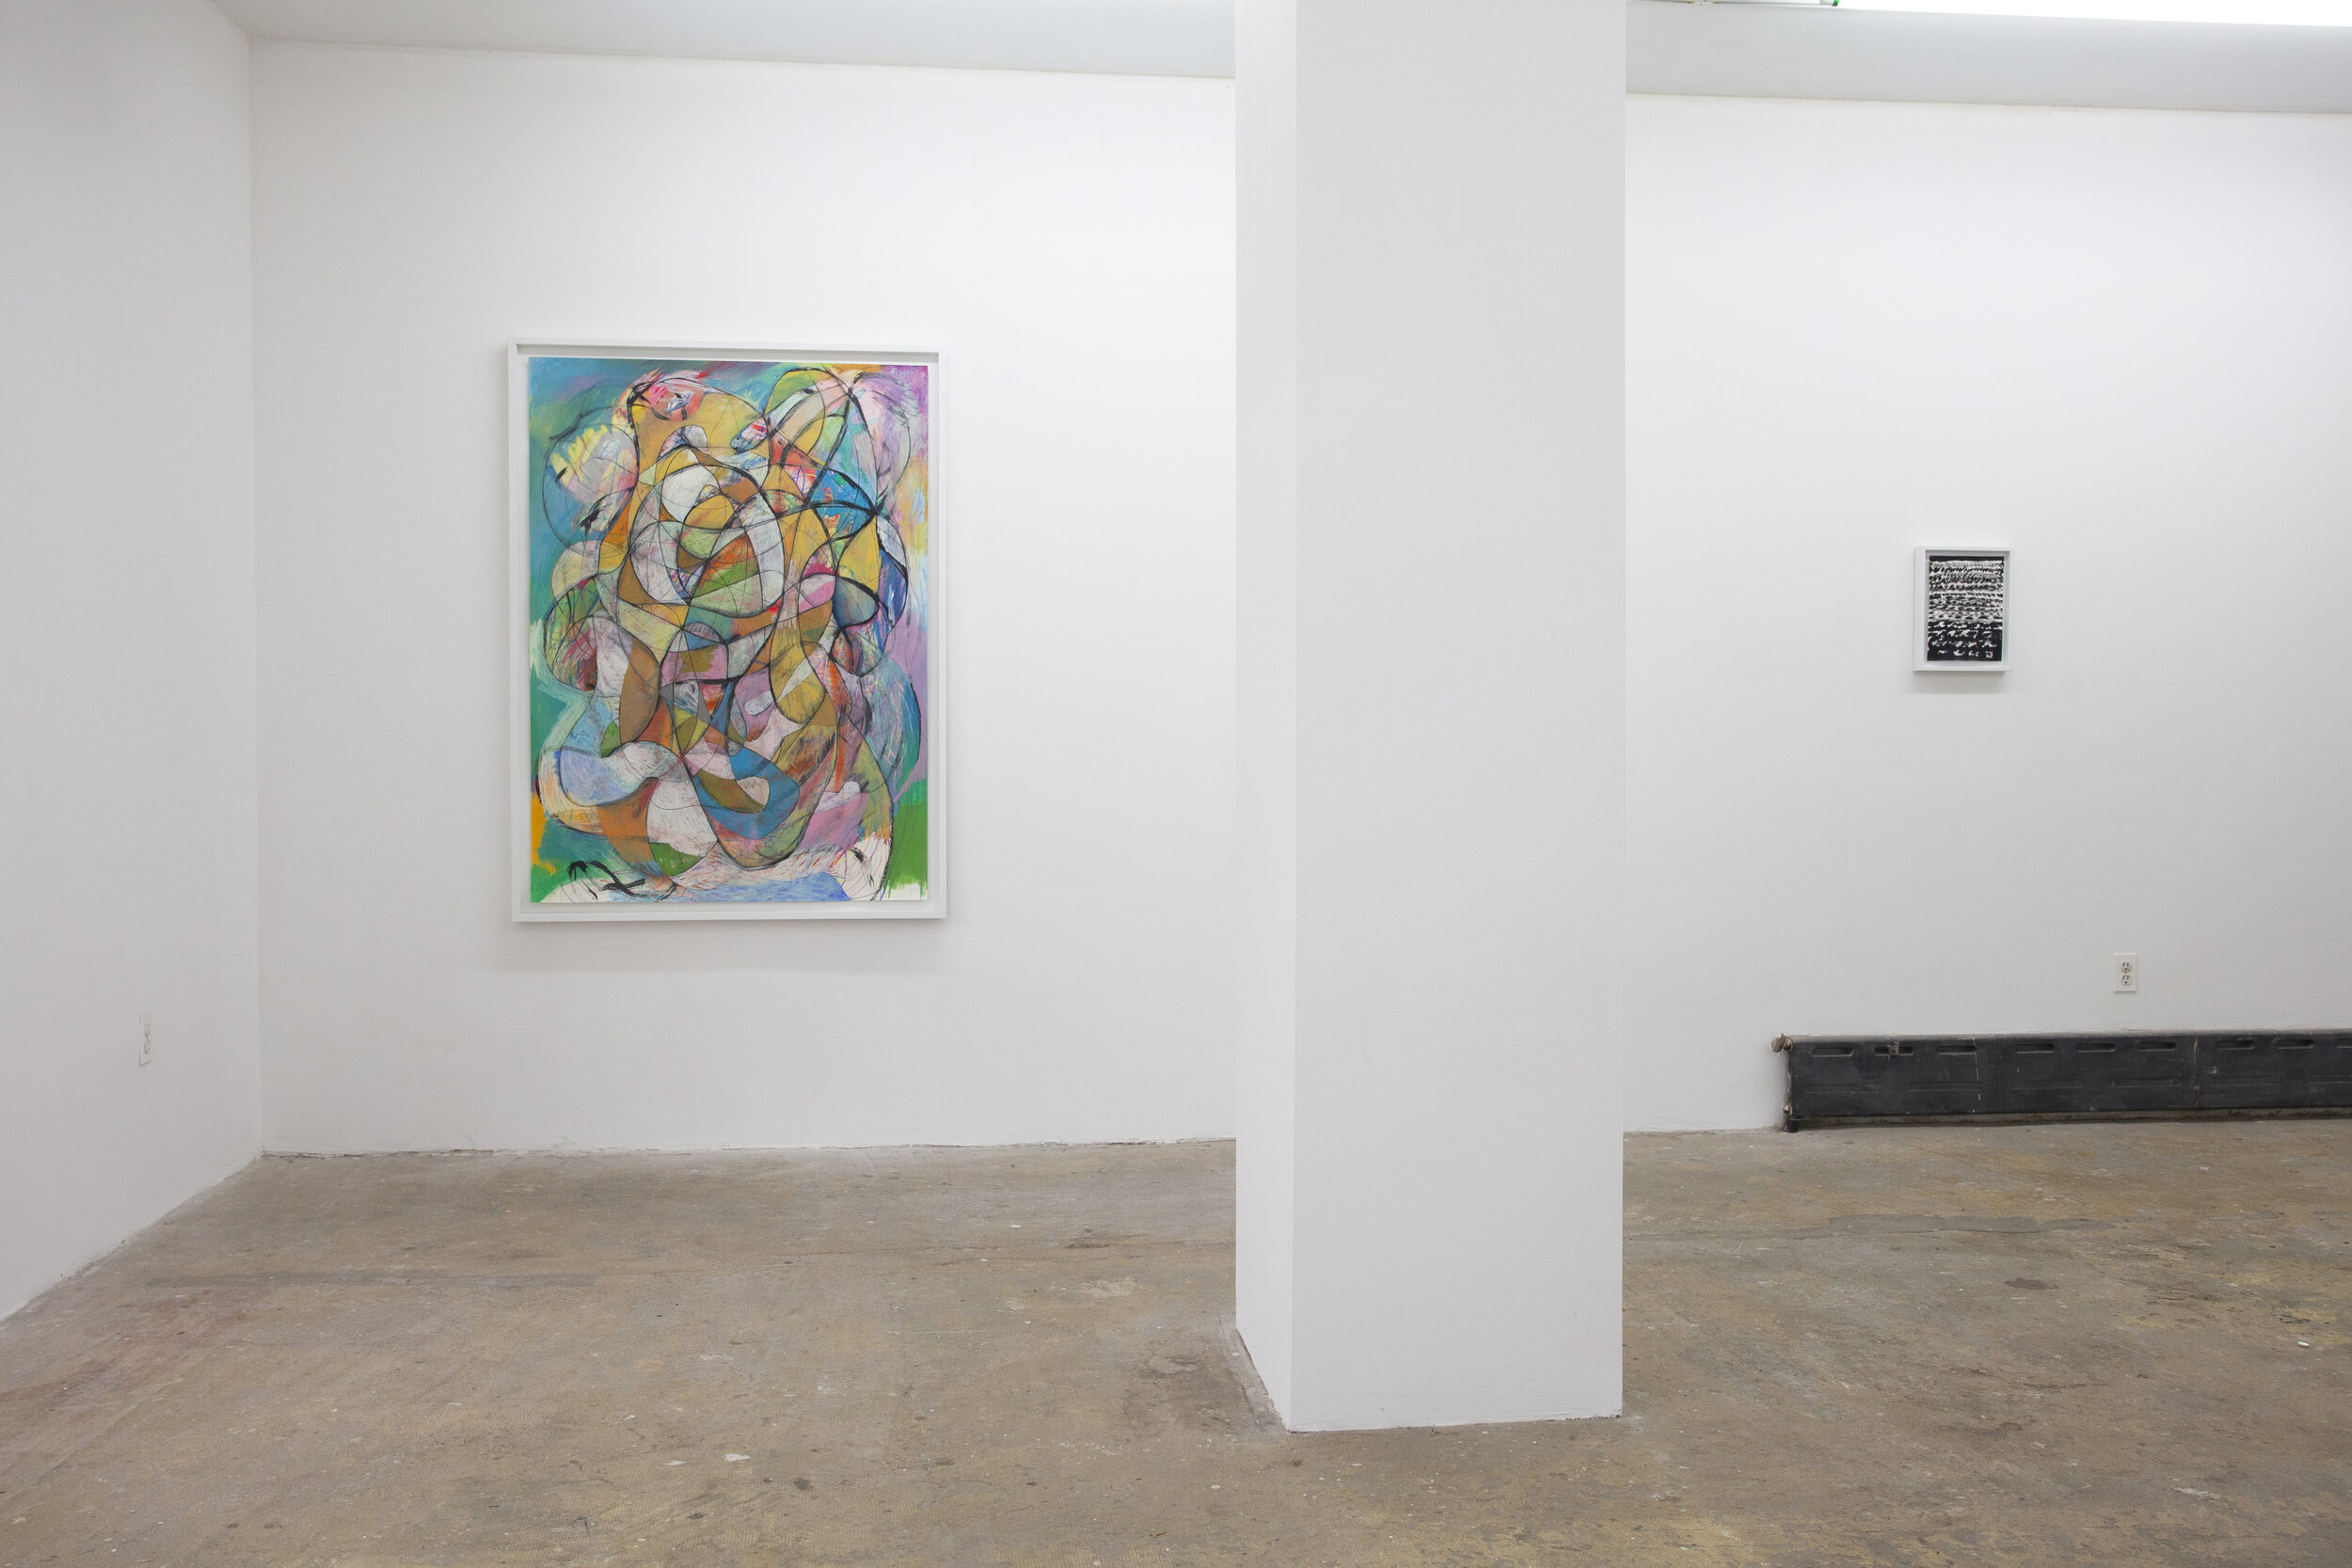 Installation image of works on paper by Rusty Shackleford from his 2017 exhibition, The Physicality of Revisiting Old Haunts, at Cindy Rucker Gallery